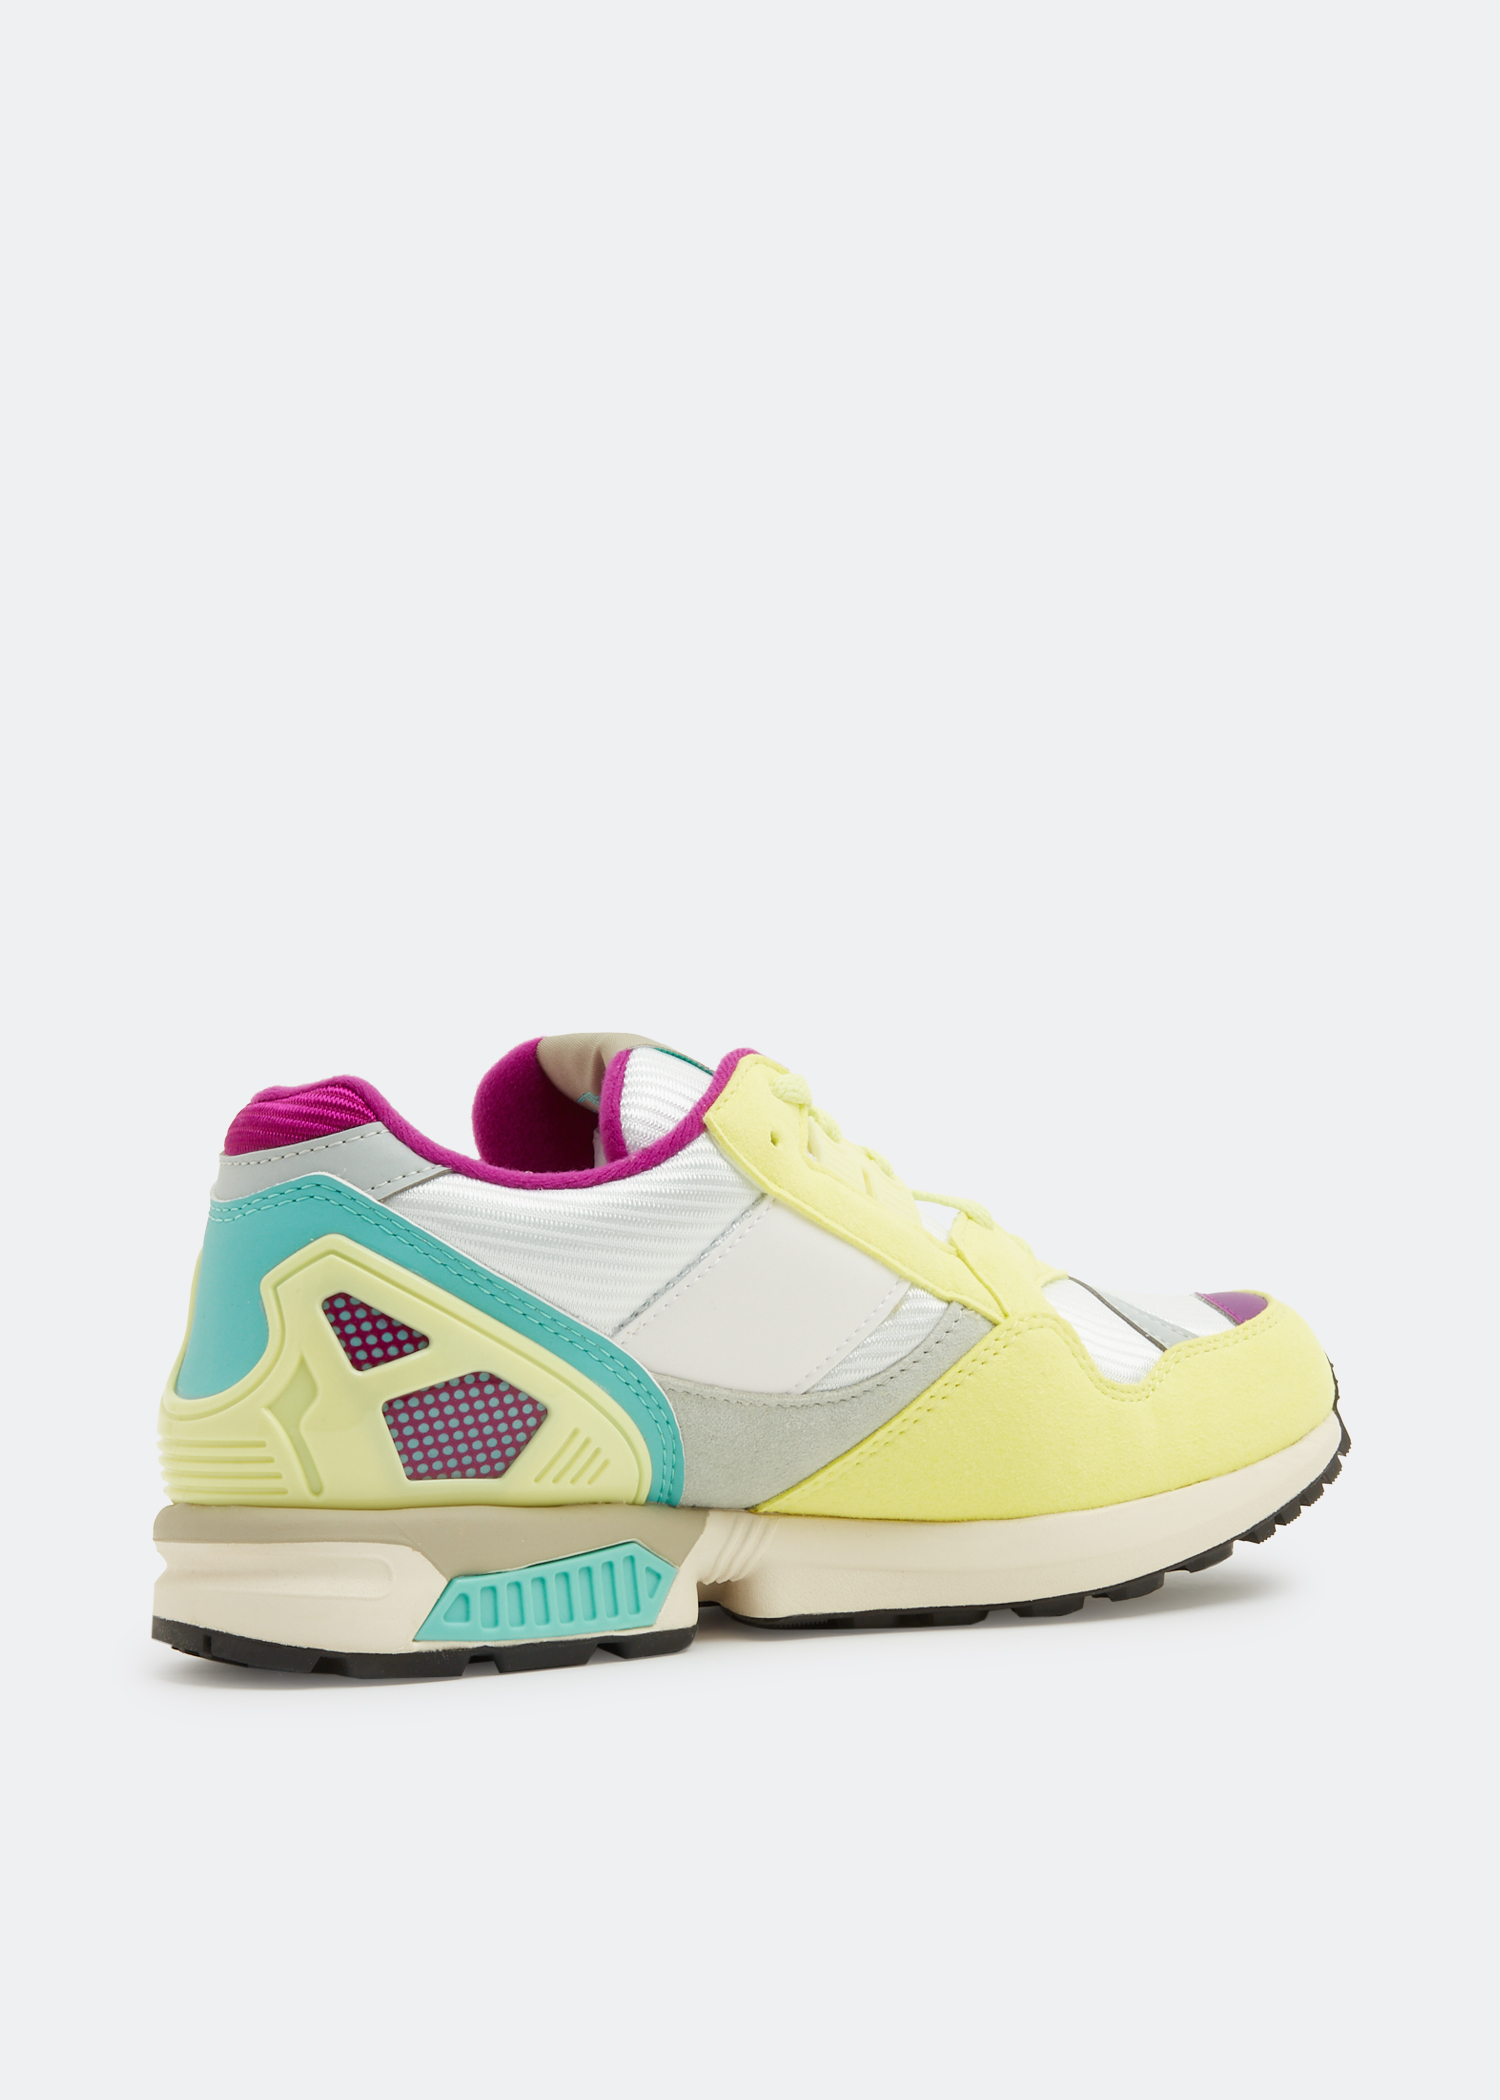 Adidas ZX 9000 sneakers for Men - Multicolored in KSA | Level Shoes